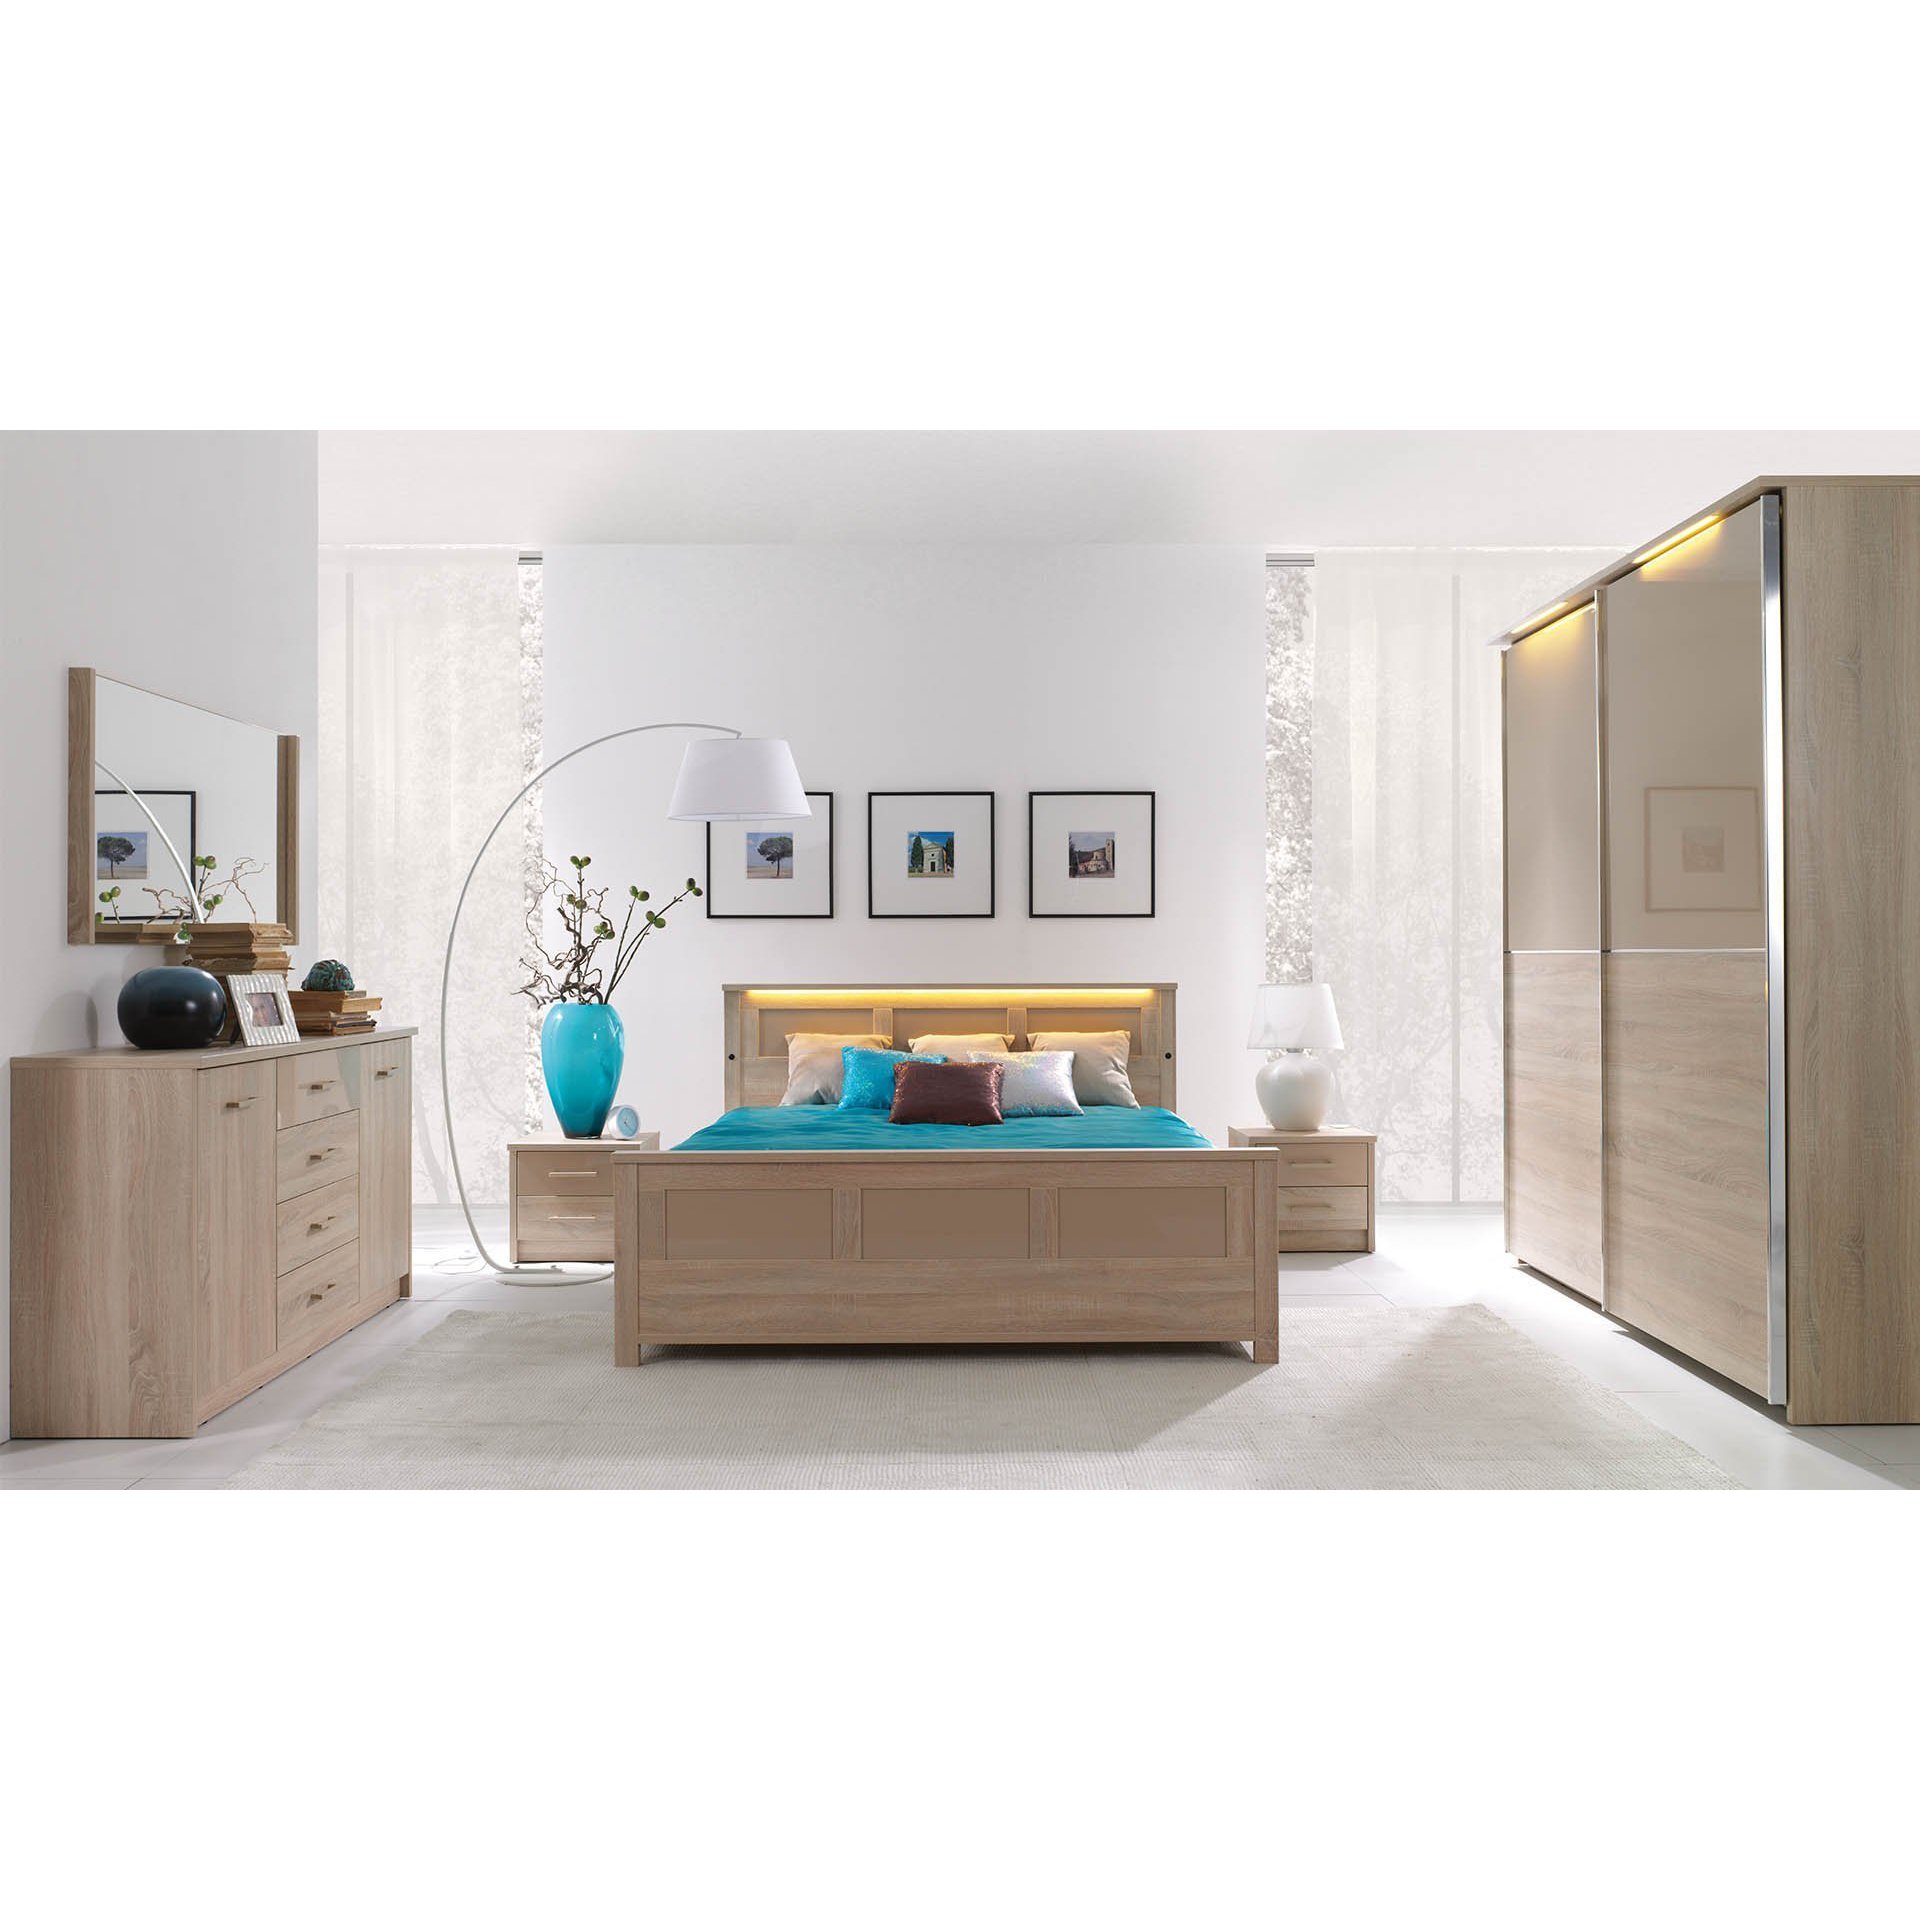 Cremona Bed with Storage and LED Lights - Oak Sonoma 160 x 200cm